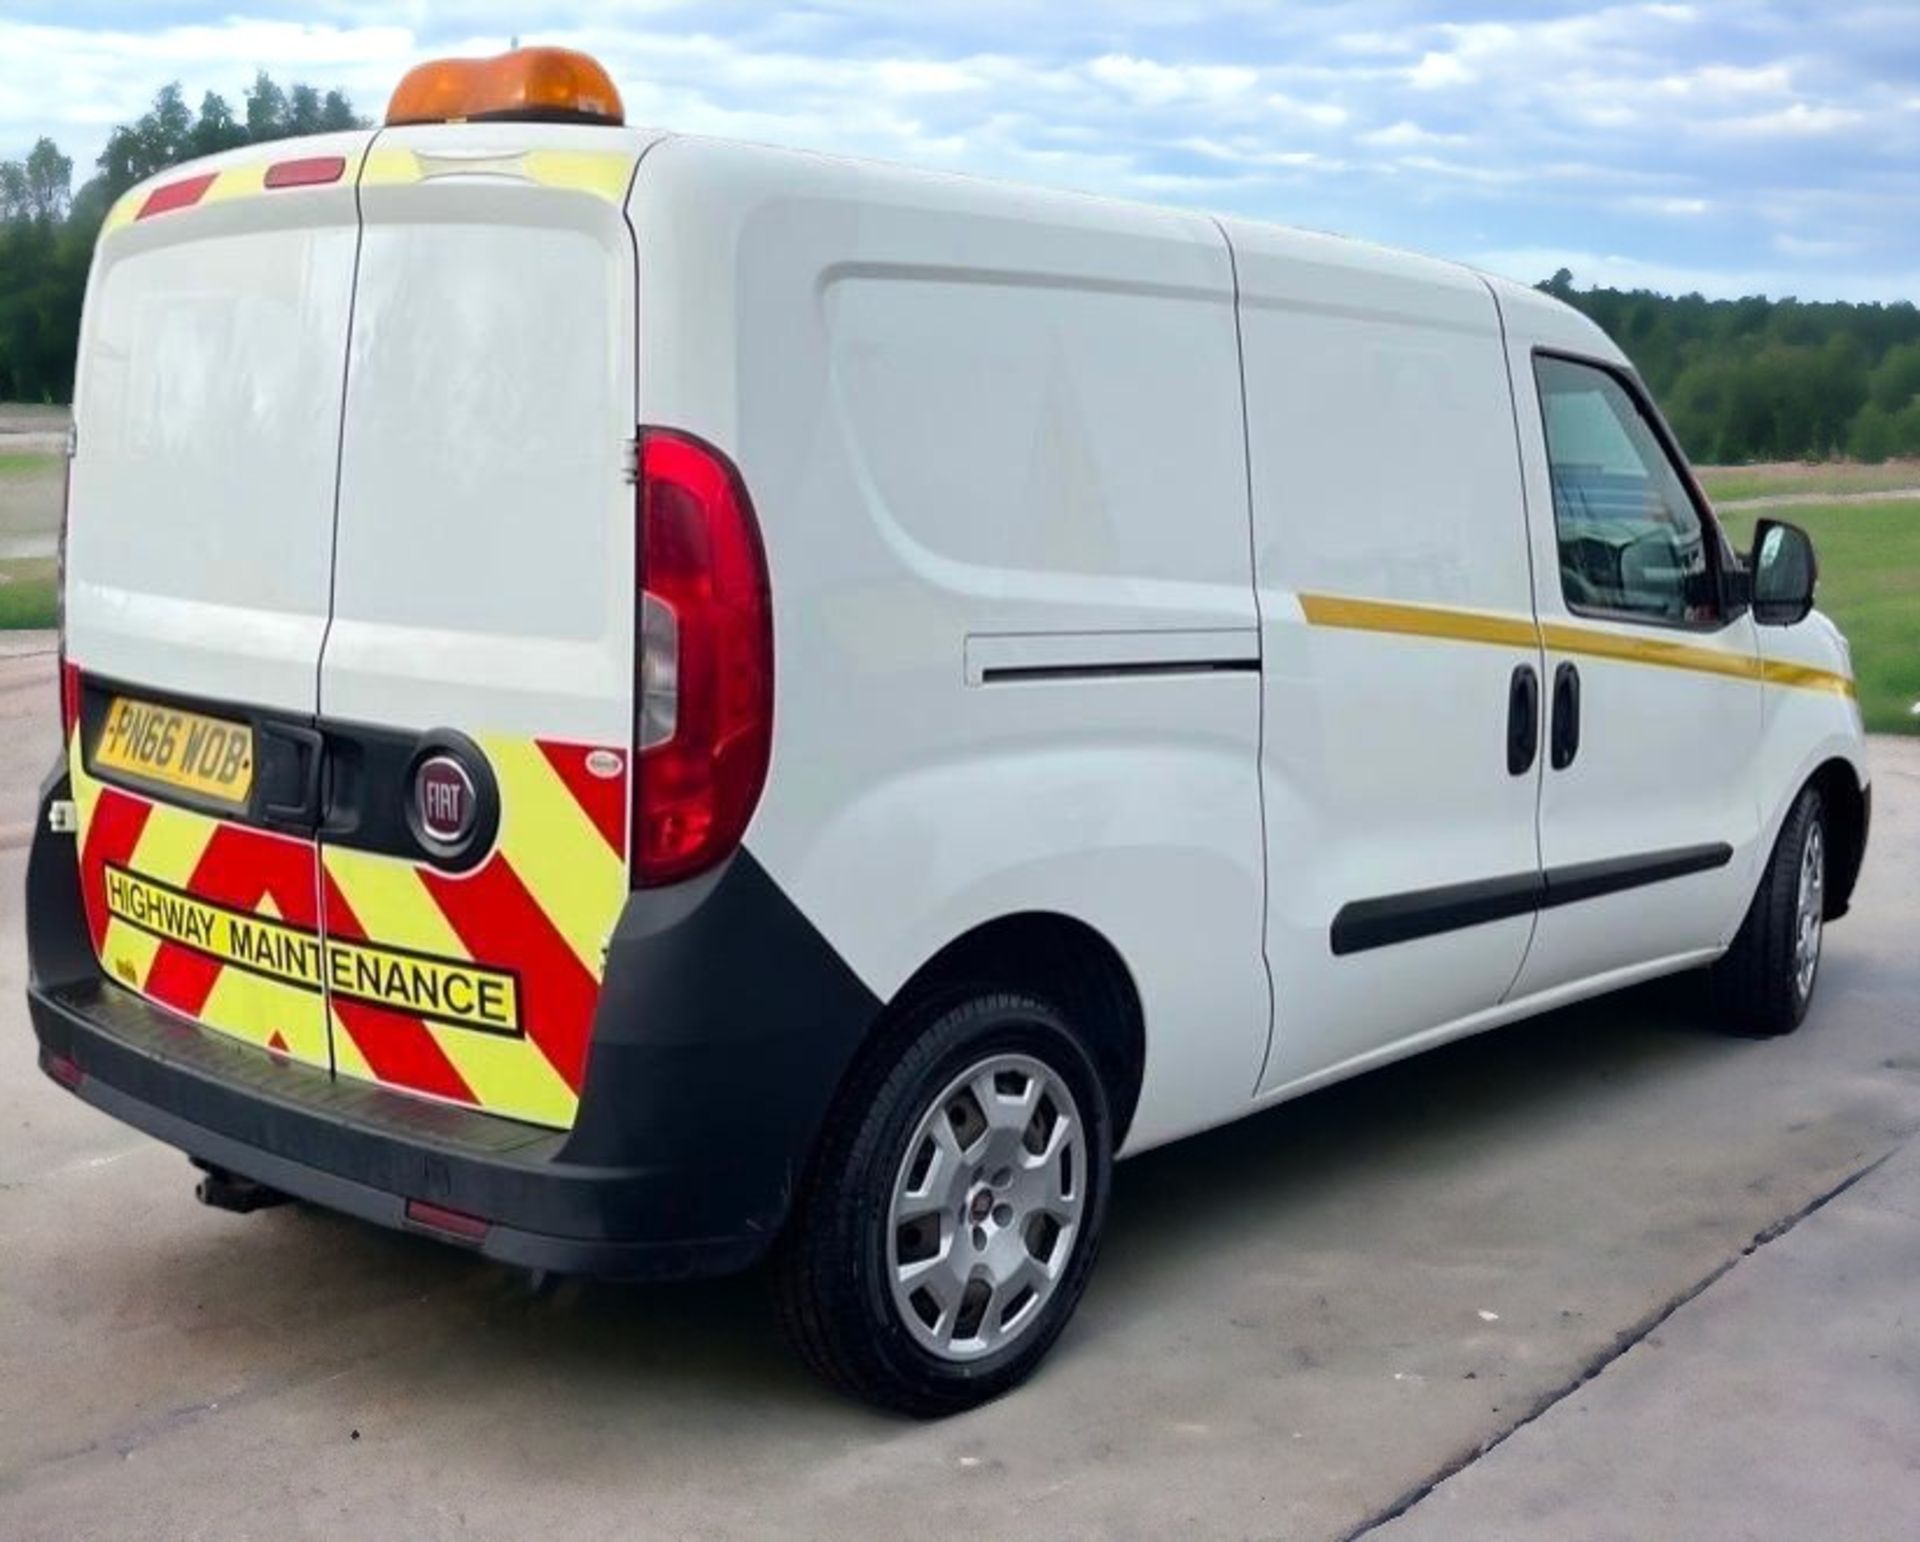 2016 FIAT DOBLO LWB MAXI: VERSATILE AND RELIABLE WORKHORSE - Image 2 of 12